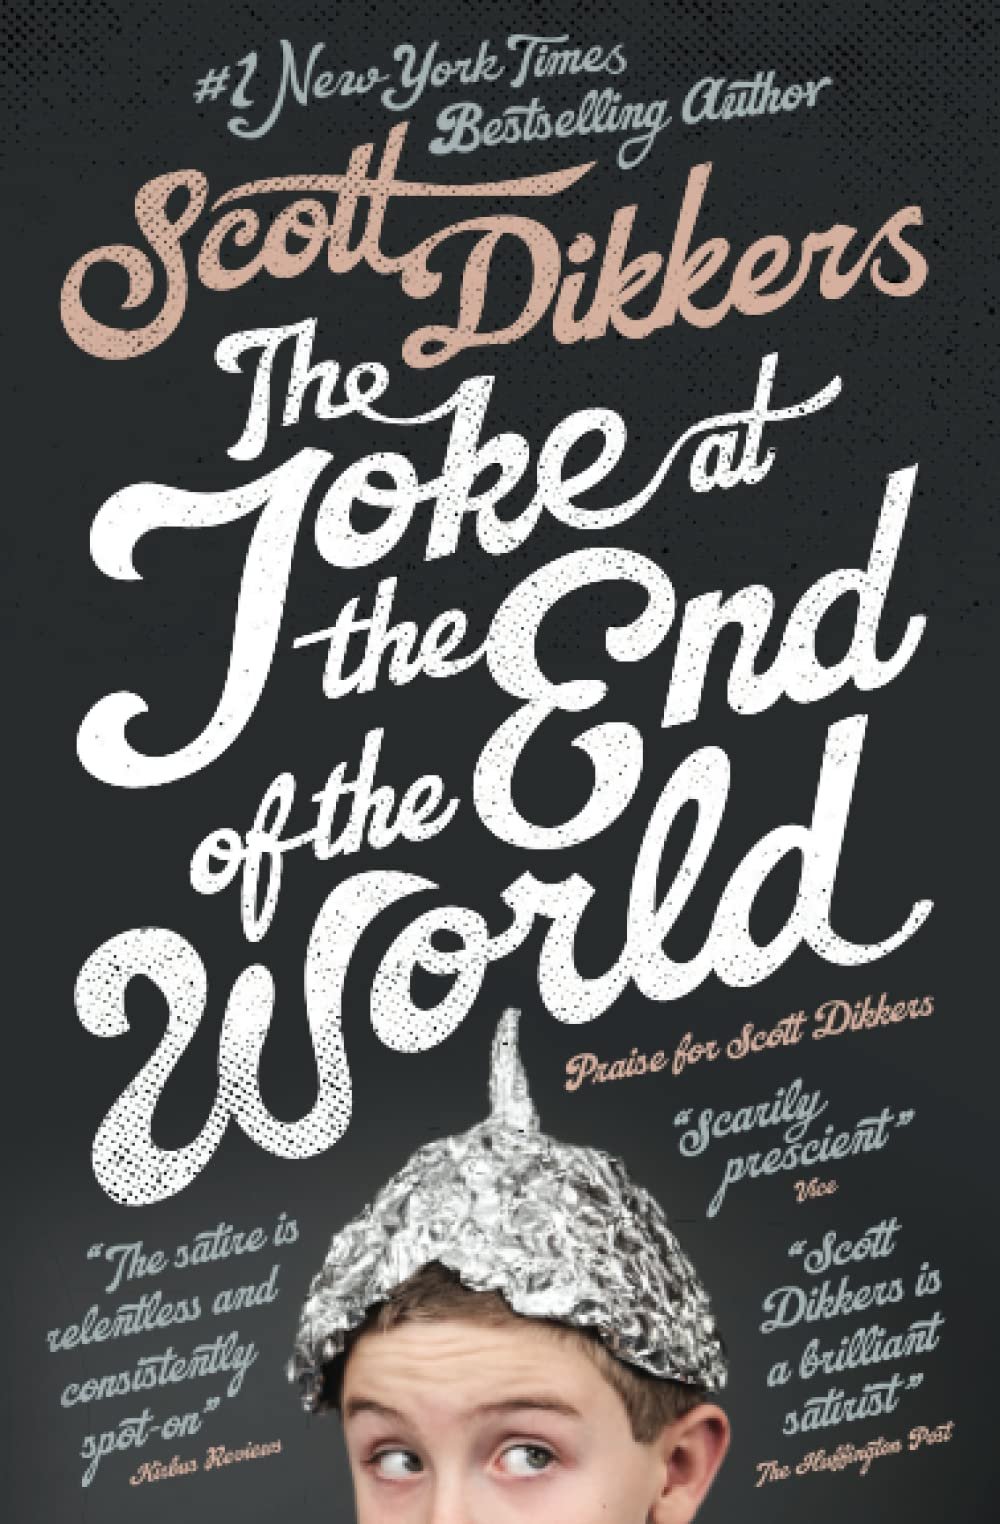 The Joke at the End of the World by Scott Dikkers